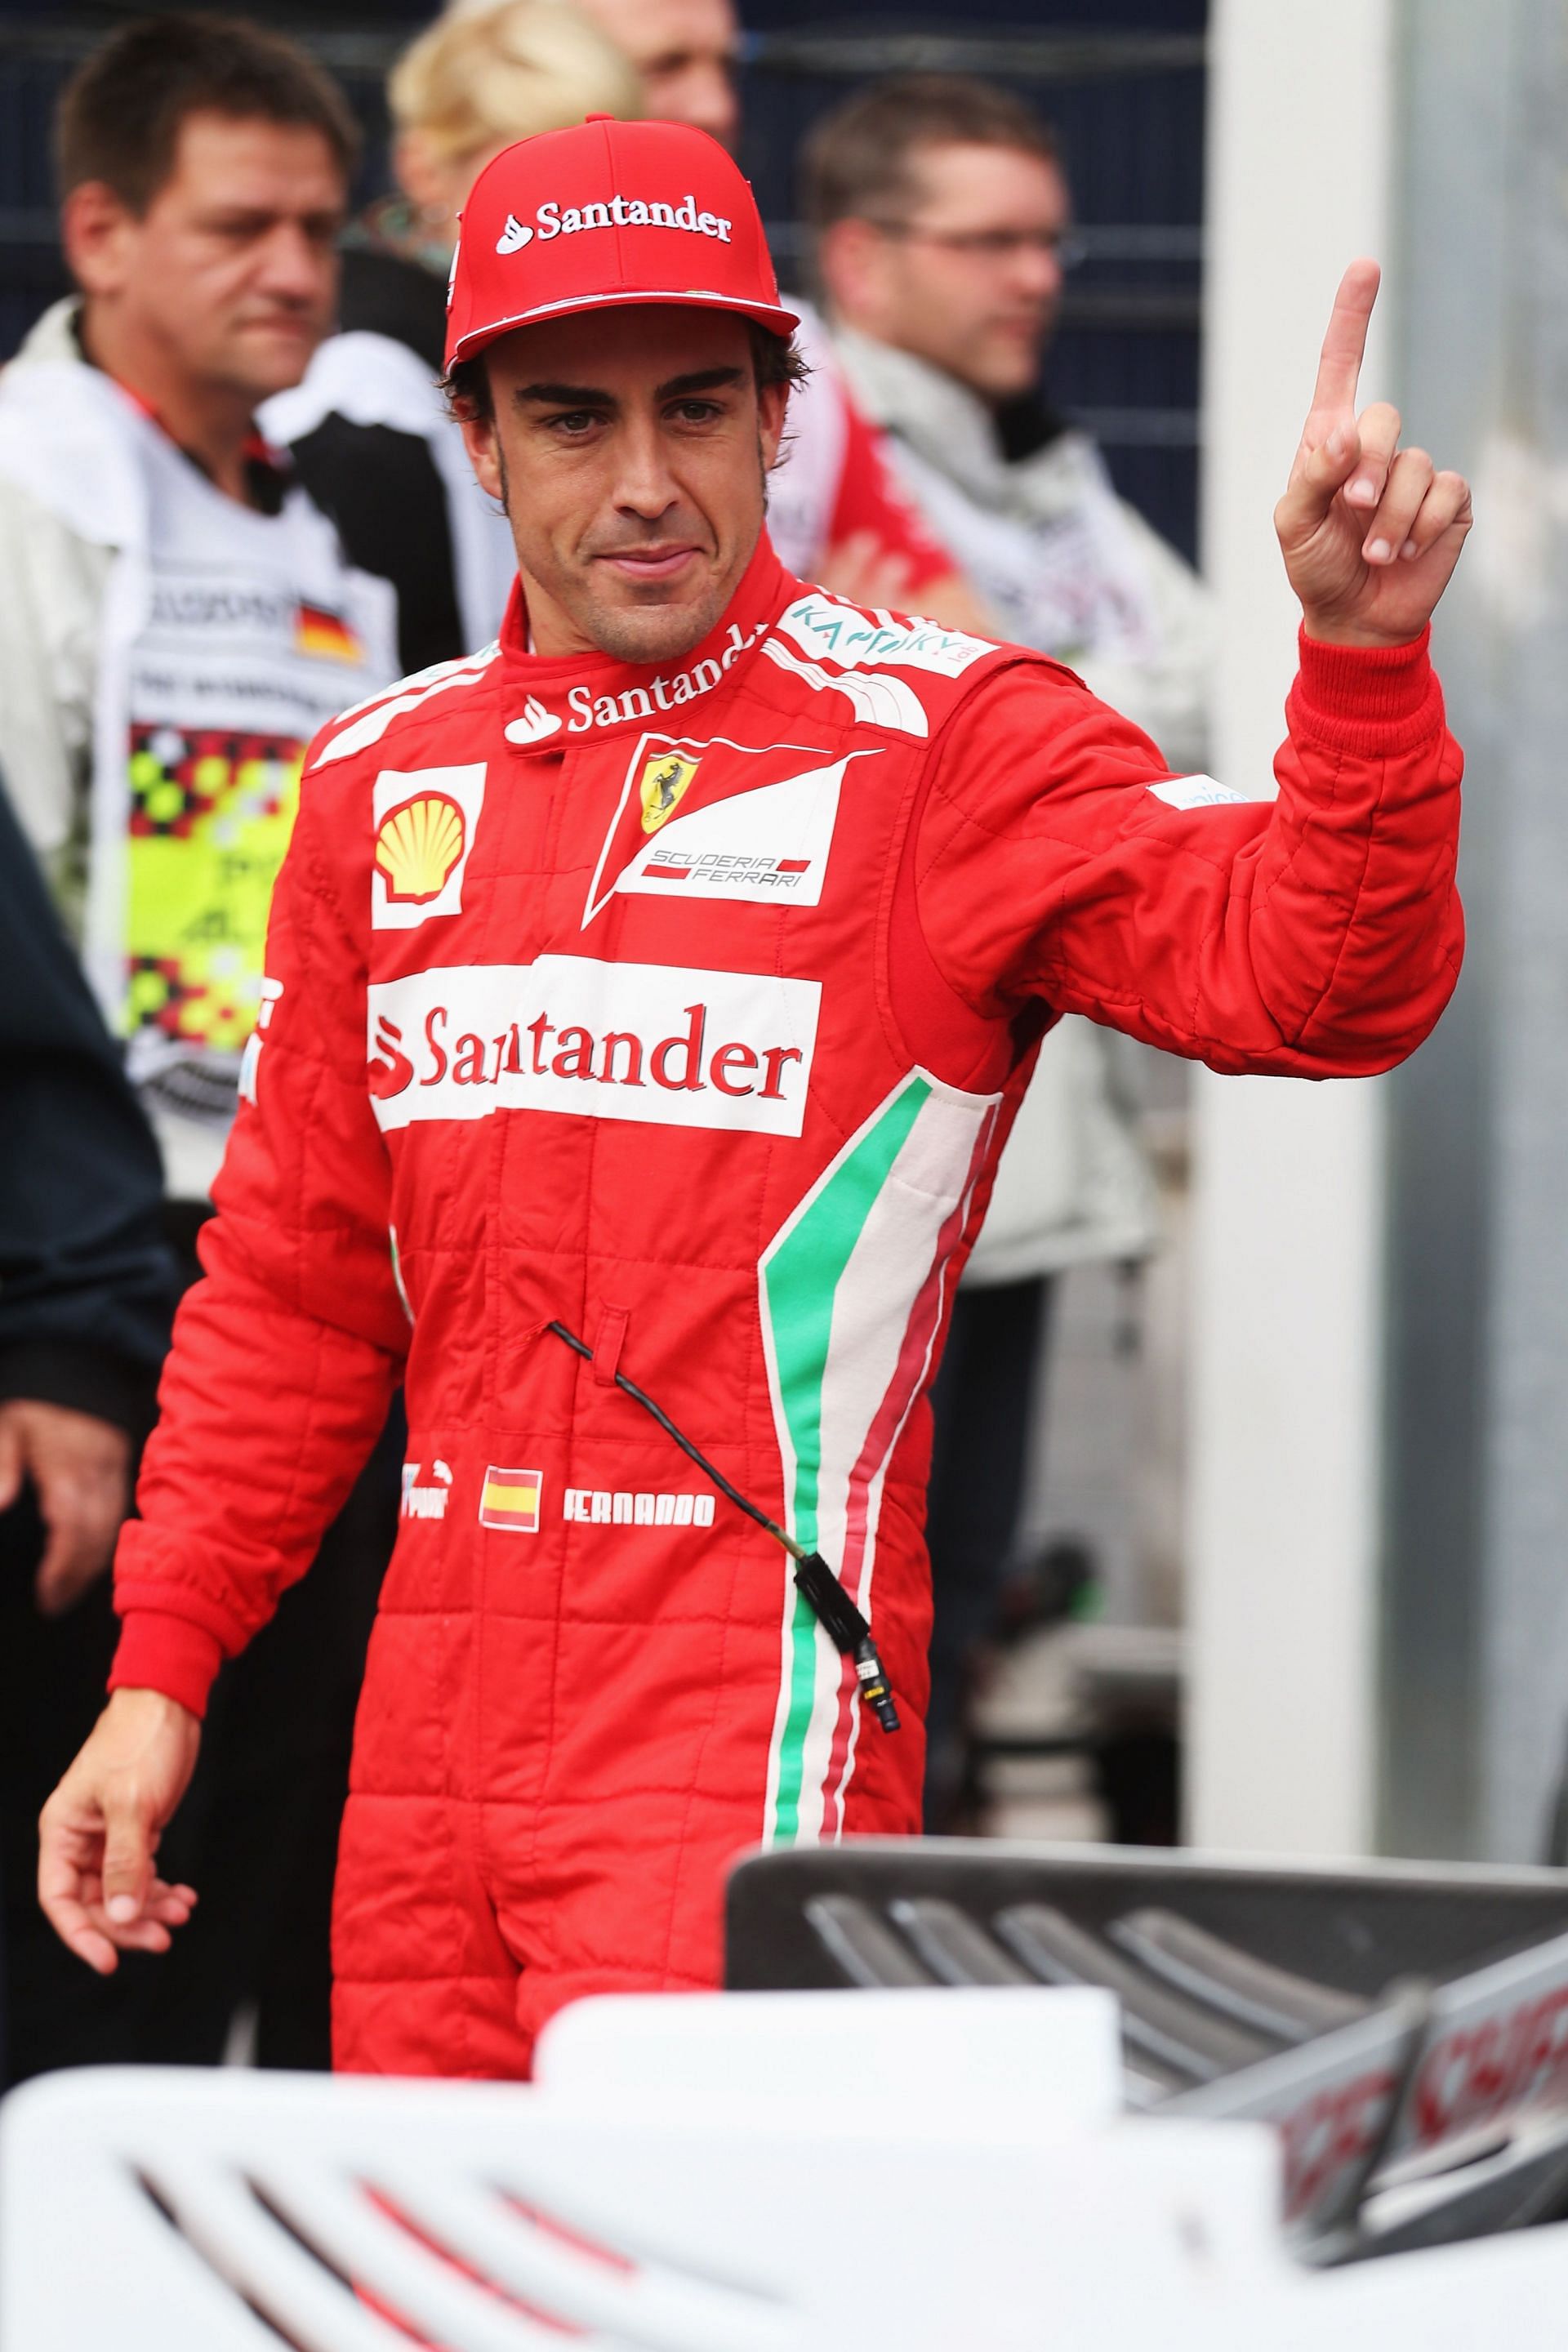 A happy Fernando Alonso after qualifying on pole at the 2012 German Grand Prix